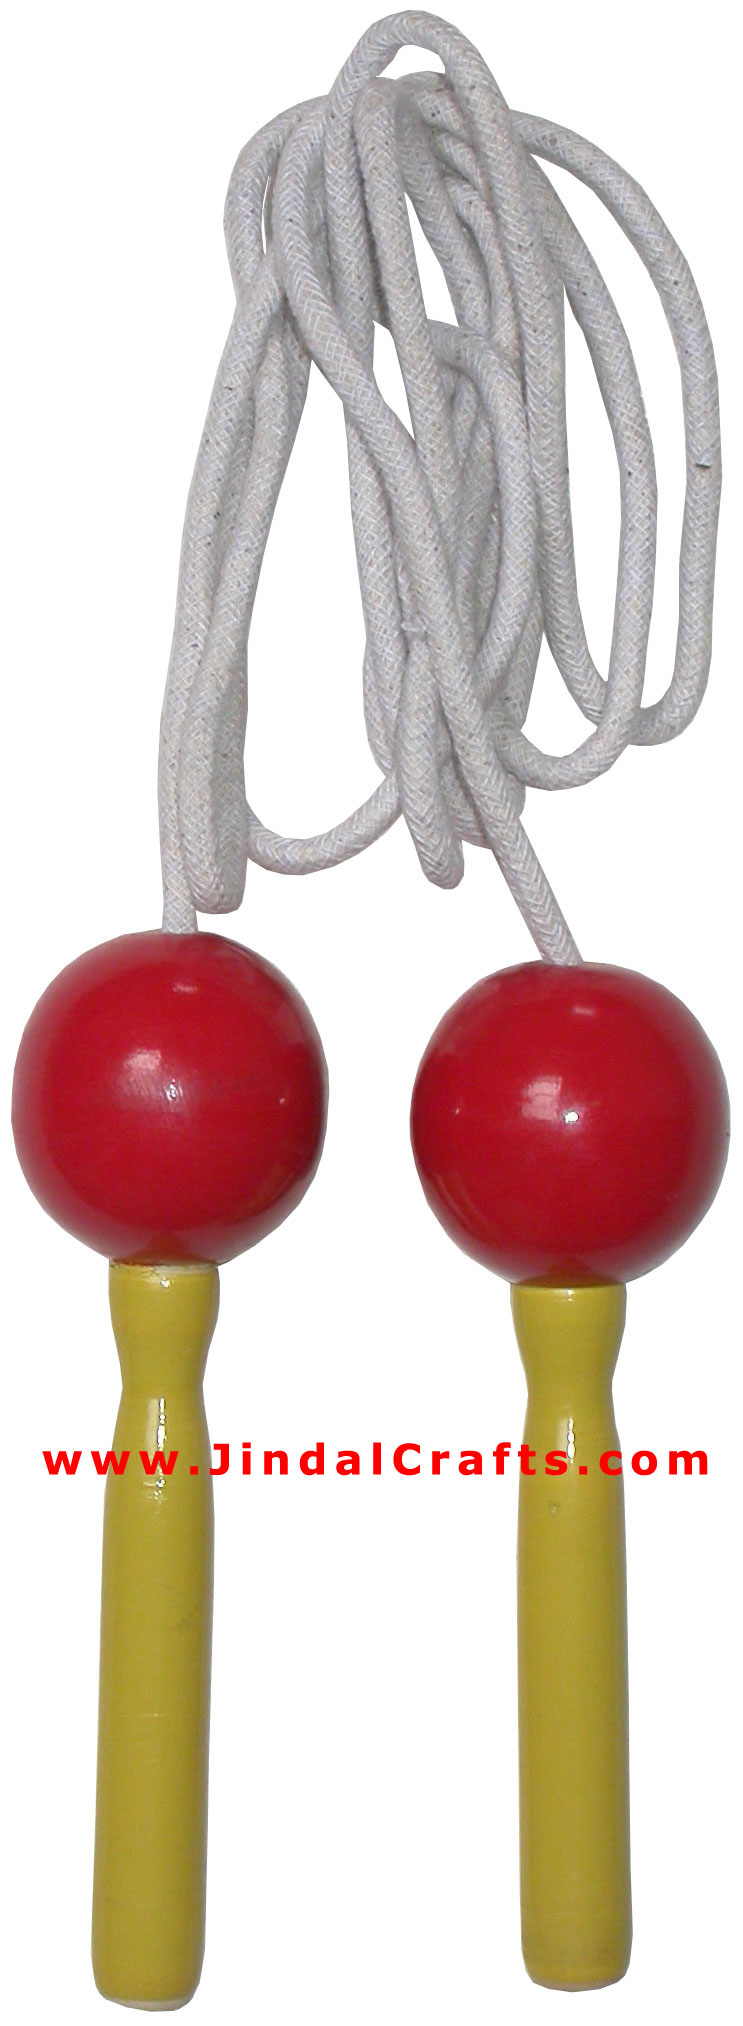 Wooden Jump Rope Skipping Rope Excercise Material India